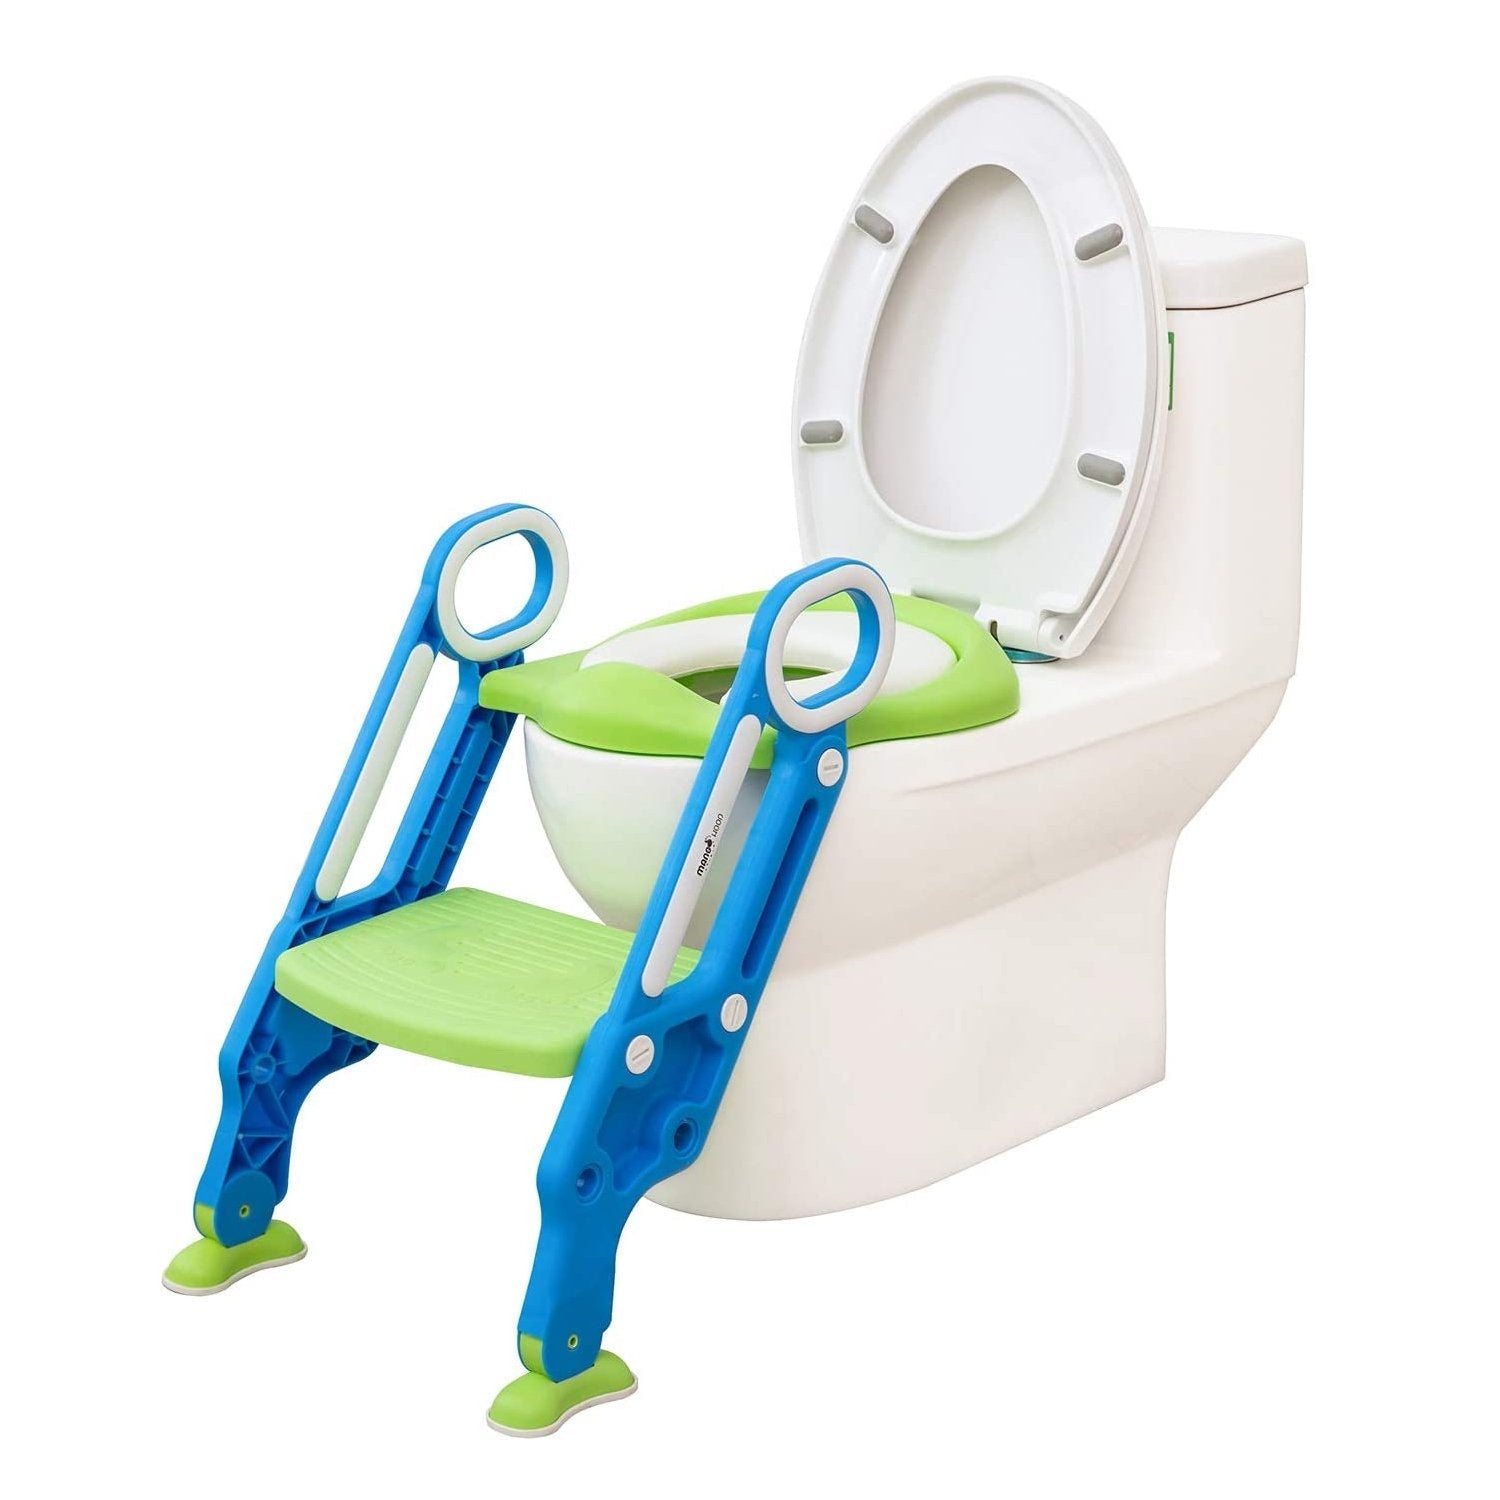 1483 2 in 1 Training Foldable Ladder Potty Toilet Seat for Kids DeoDap